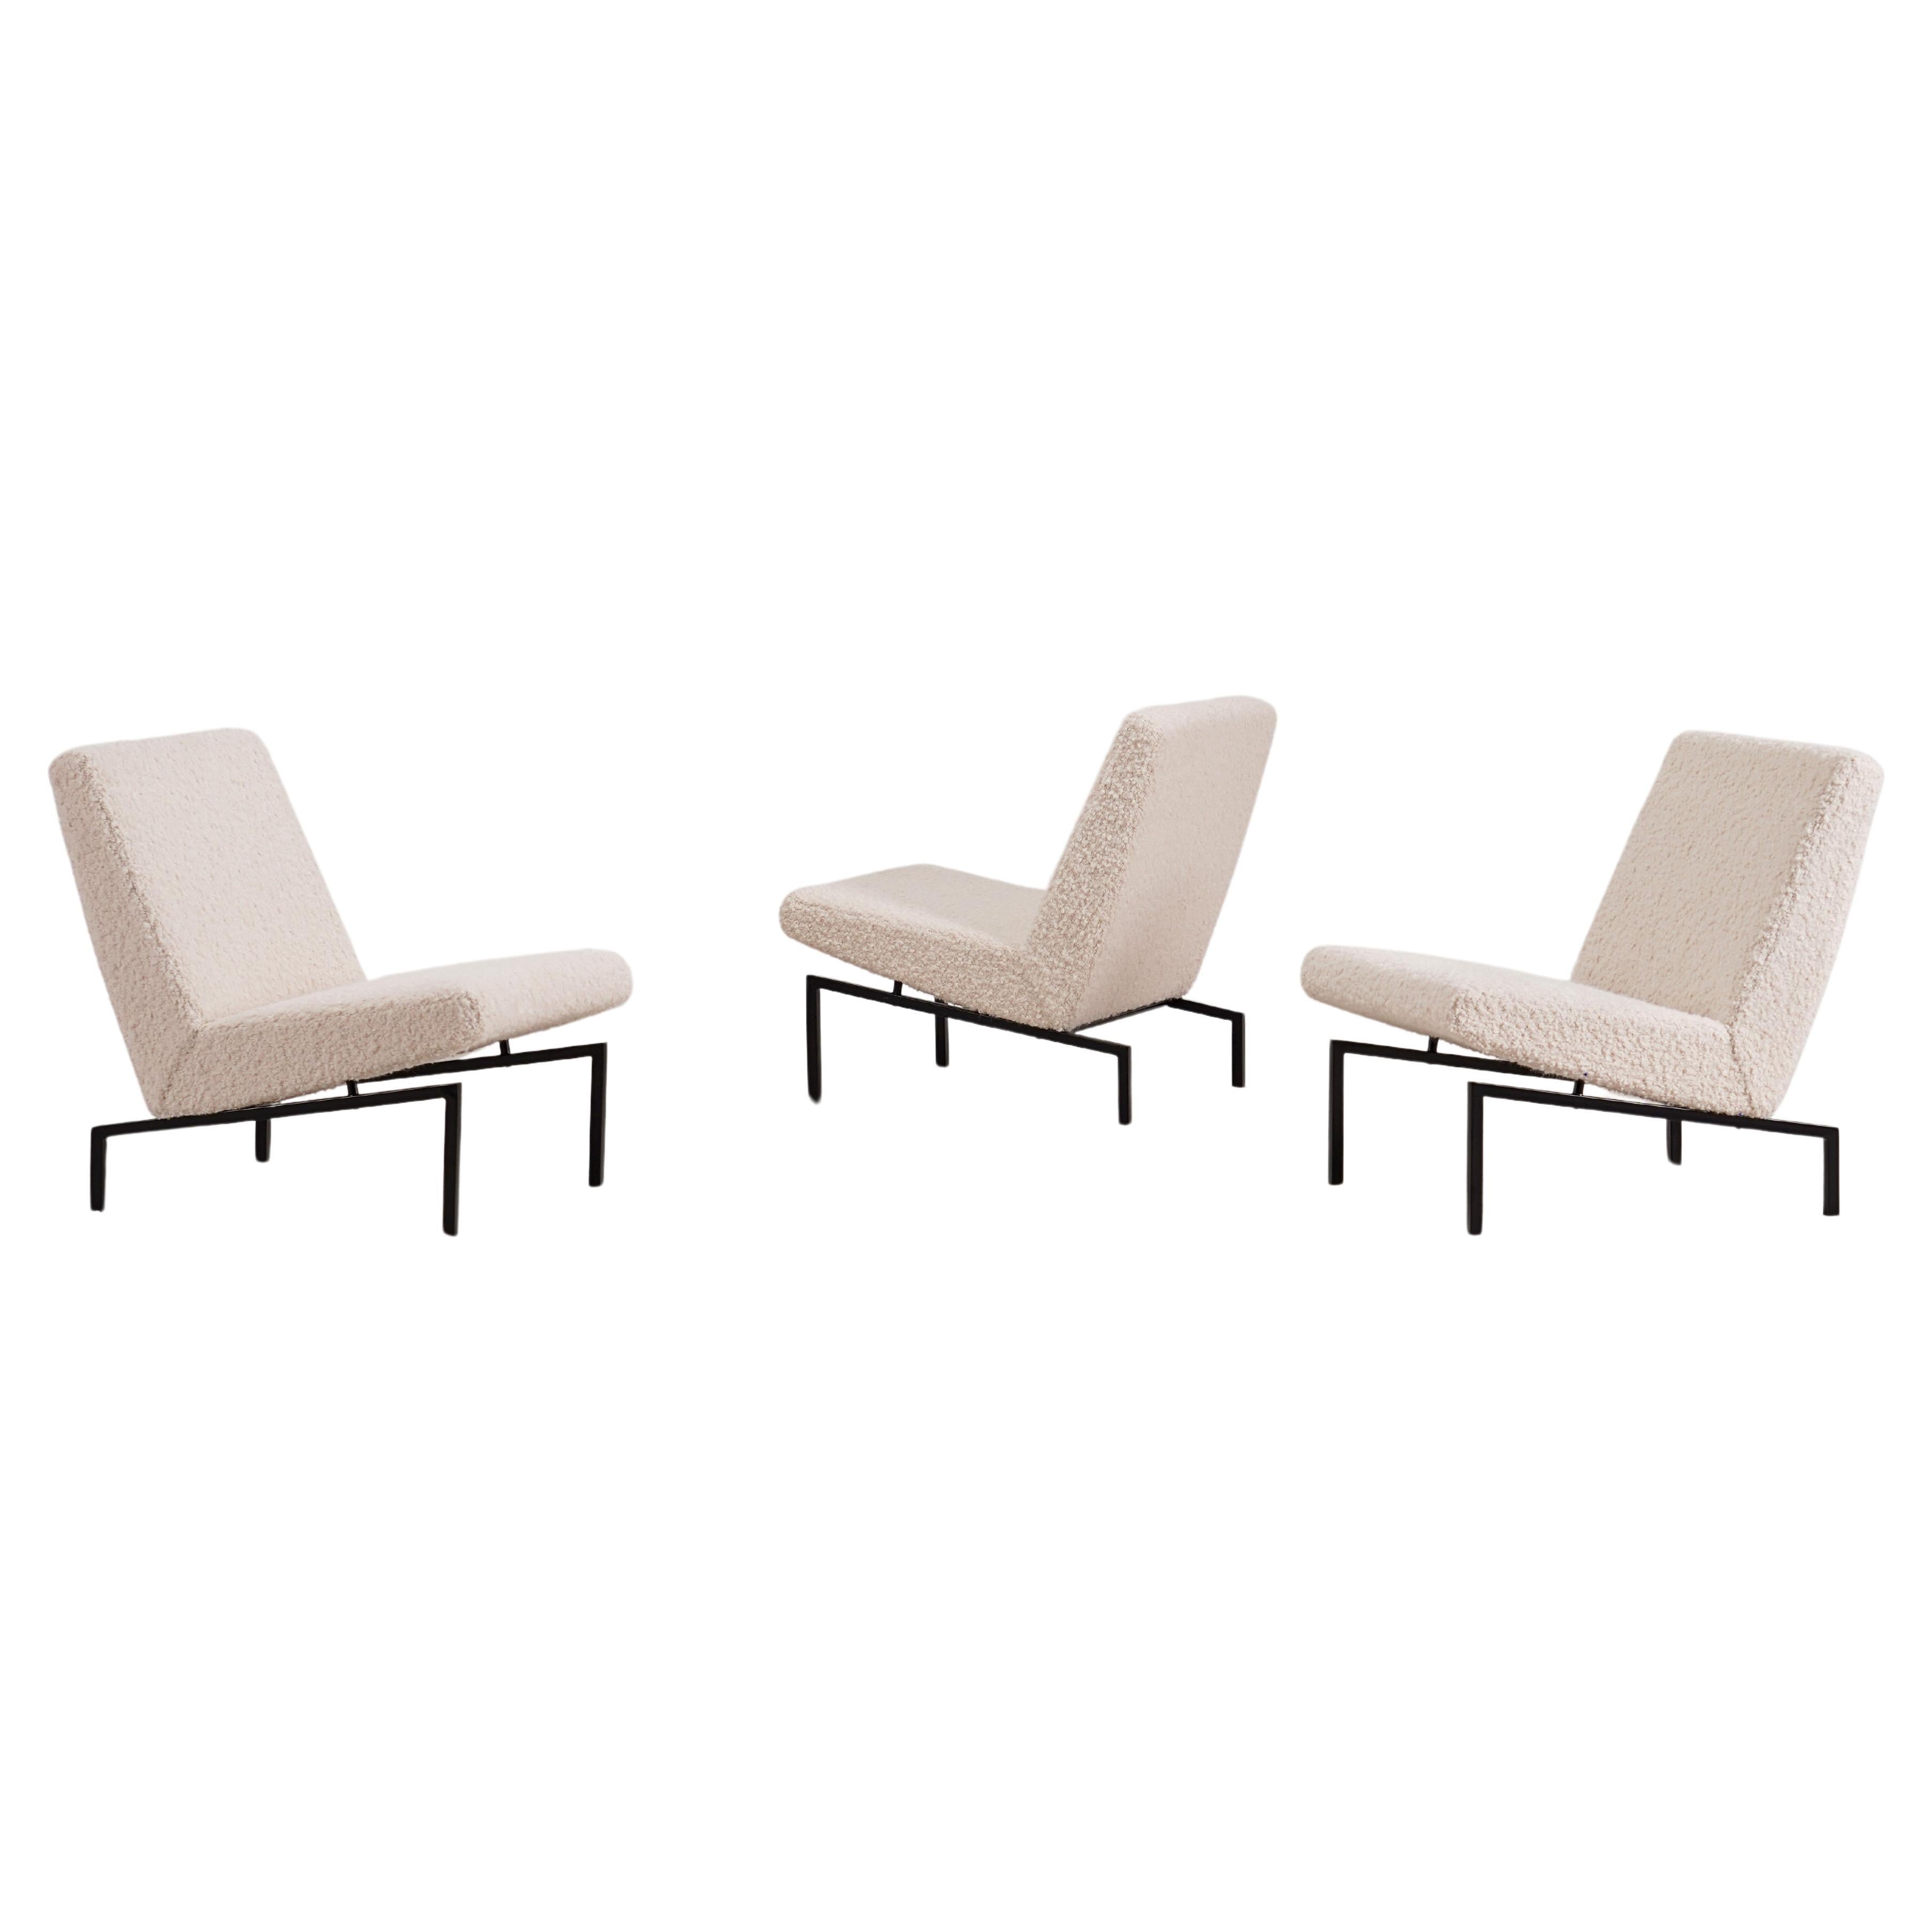 Joseph-André Motte, Set of 3 "Tempo" Easy Chairs for Steiner, France, 1950 For Sale